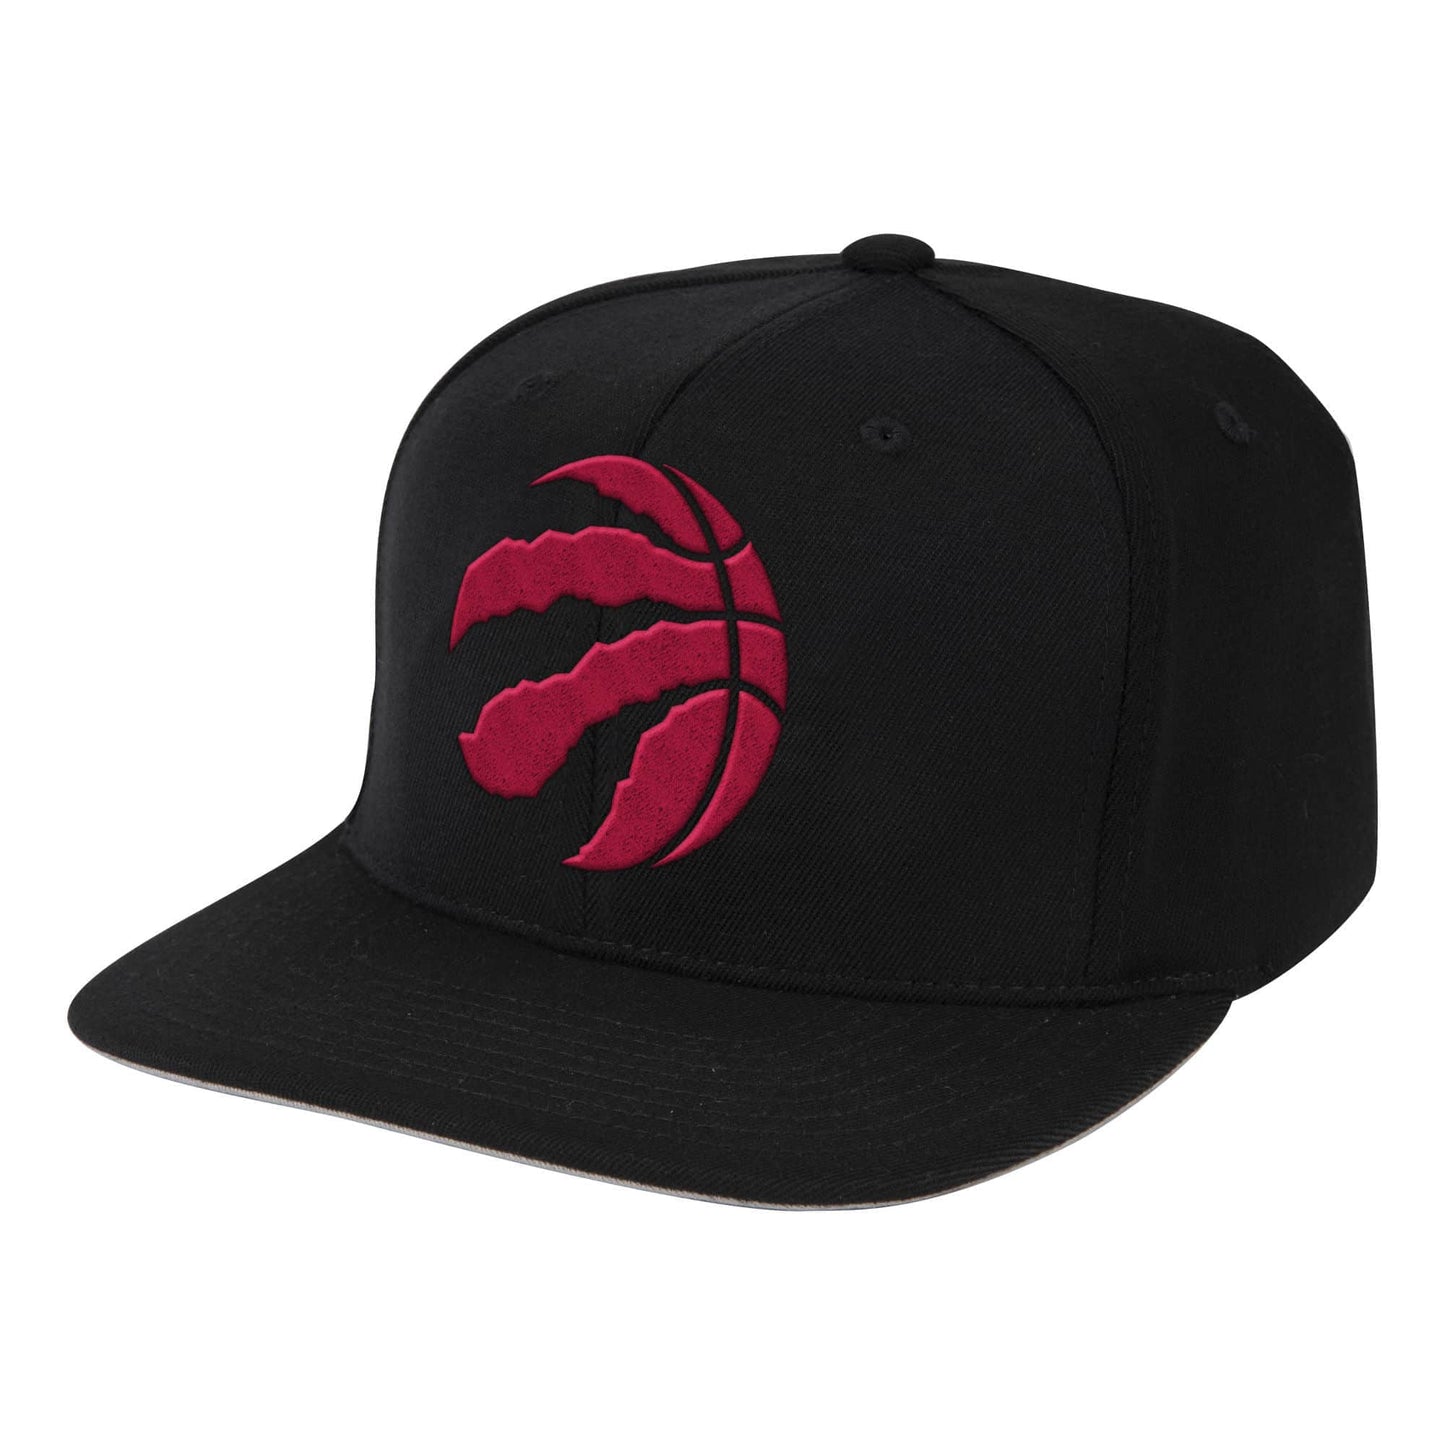 Mens NBA Toronto Raptors Downtime Classic Black Snapback Hat By Mitchell And Ness